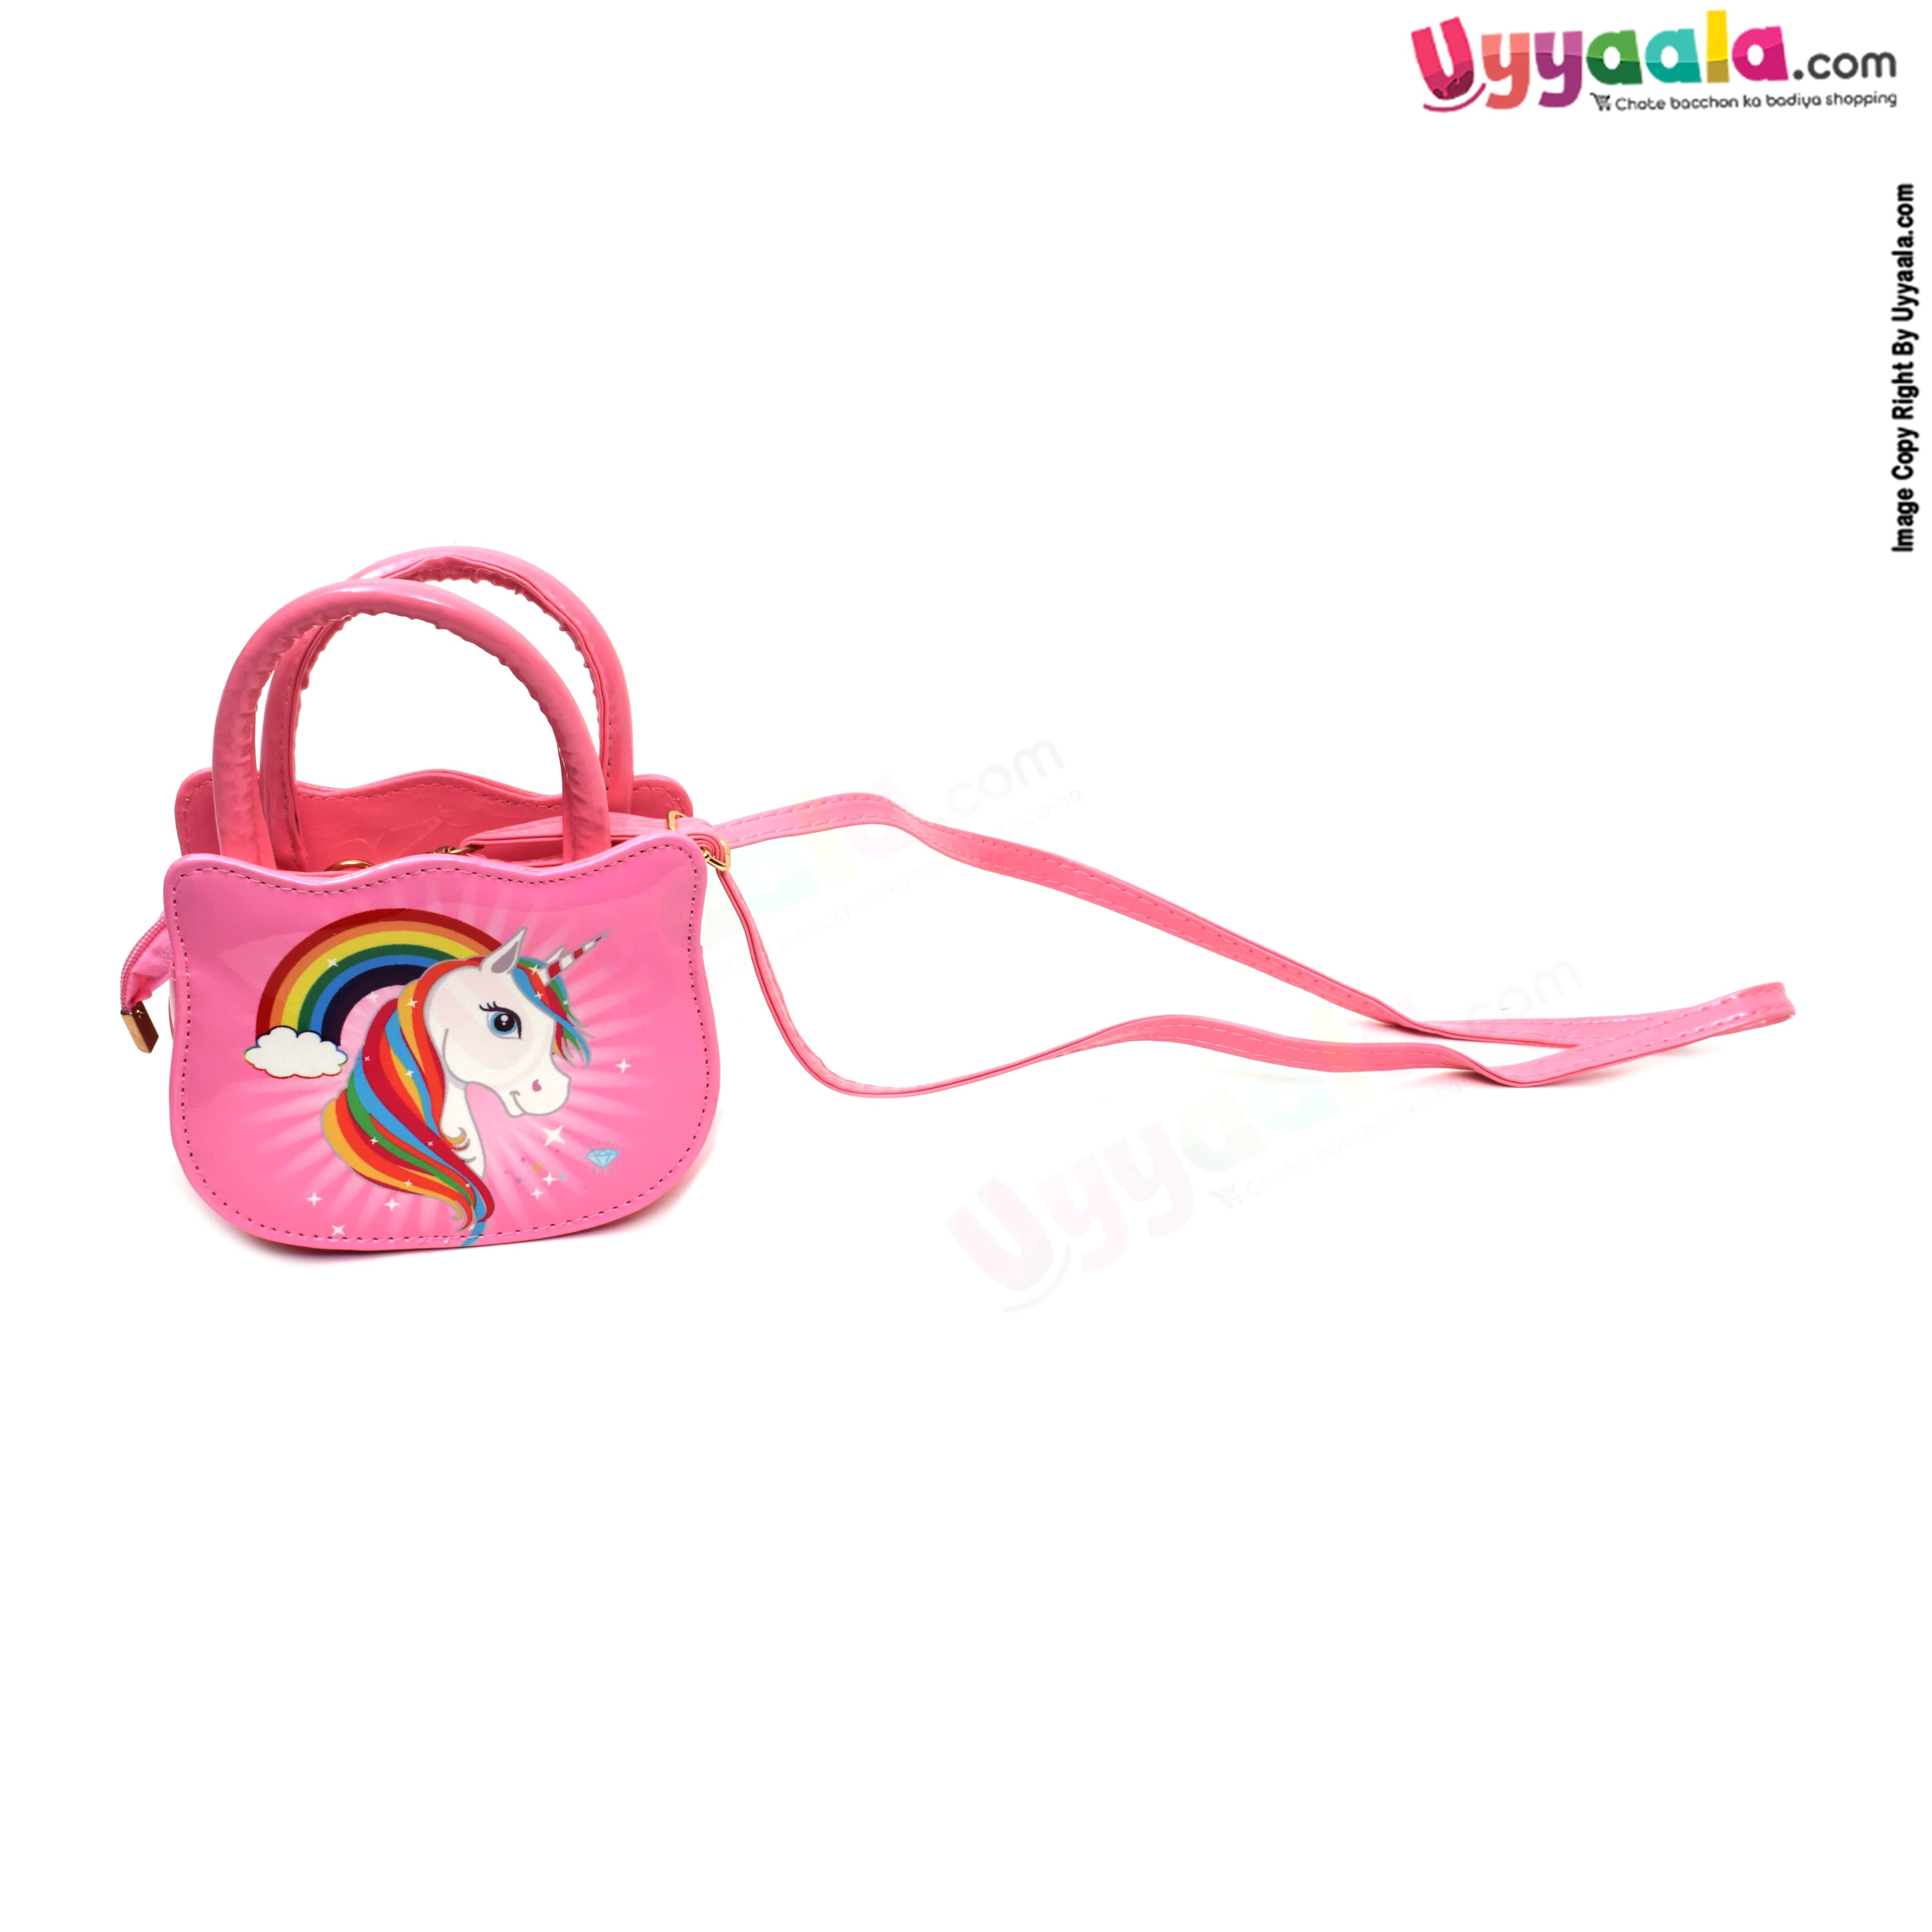 Party wear sling hand bag for kids (baby girl) with rainbow & unicorn print, age 3+ years